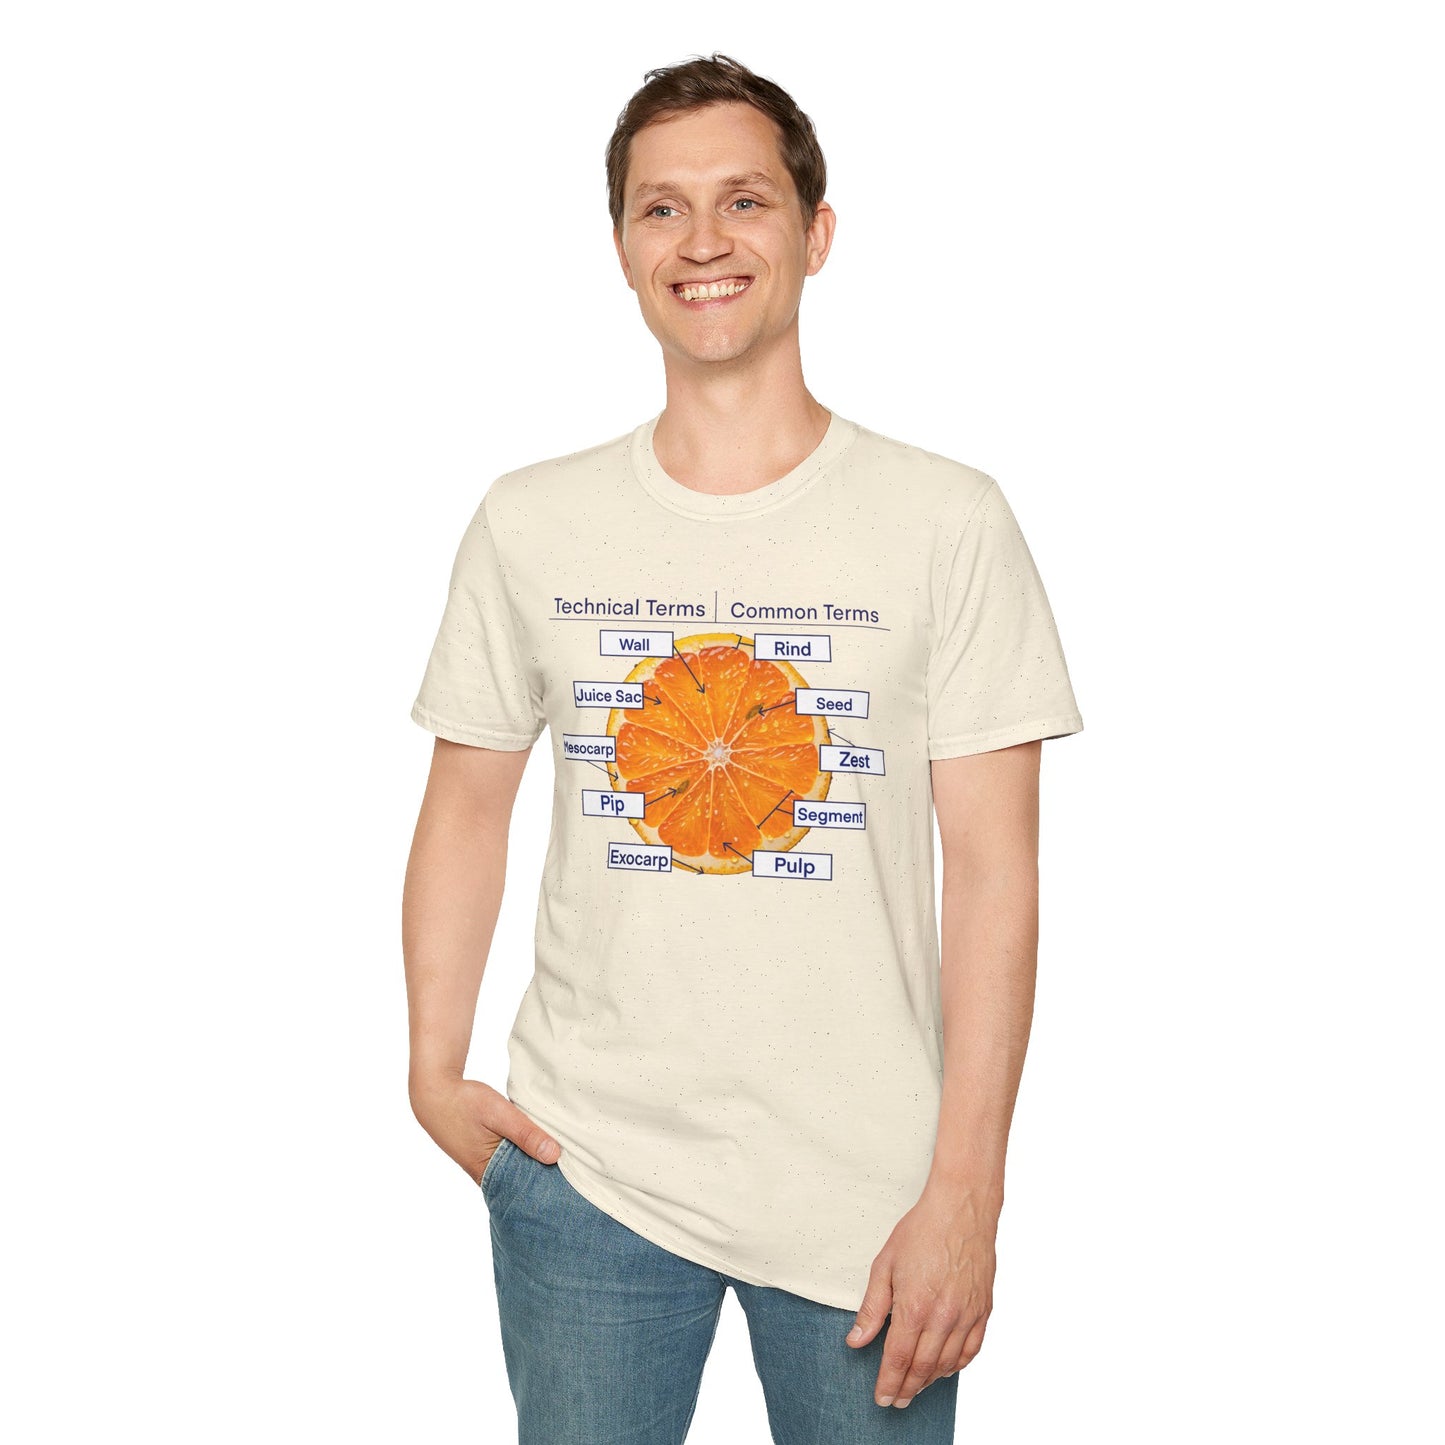 Literally Just a Shirt With a Diagram of An Orange On It